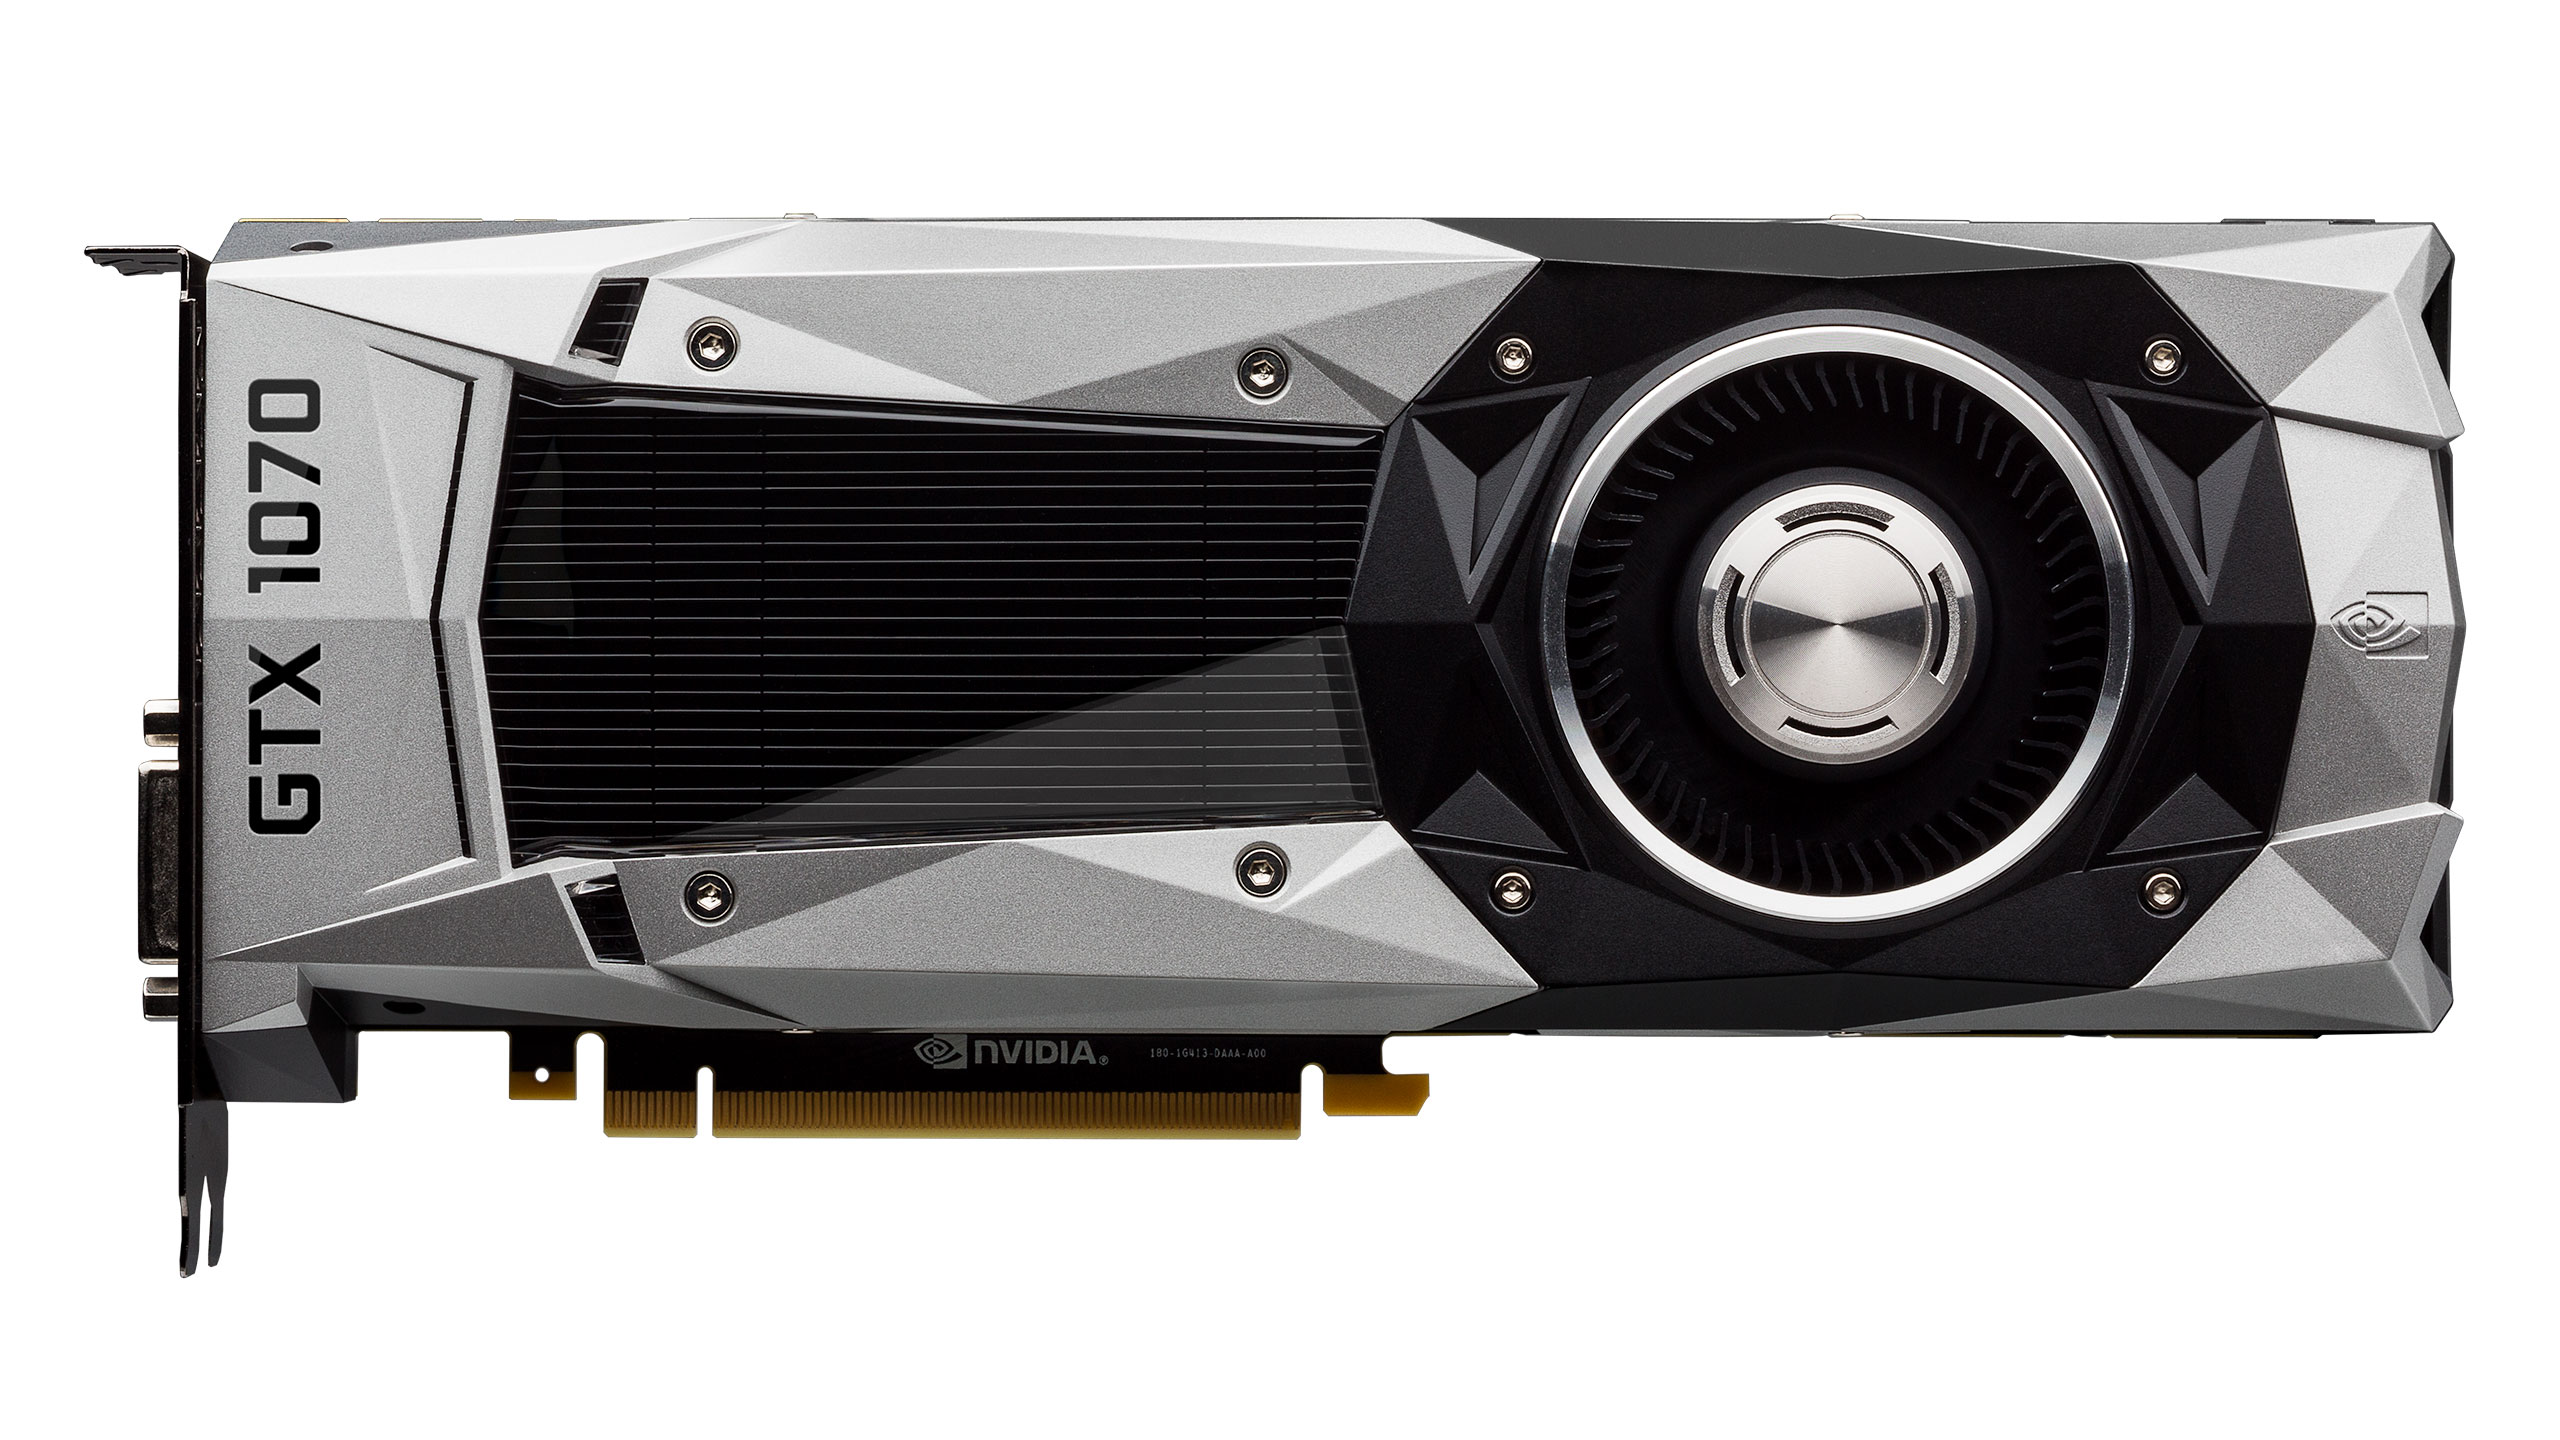 The GeForce GTX 1070 Review | PC Gamer